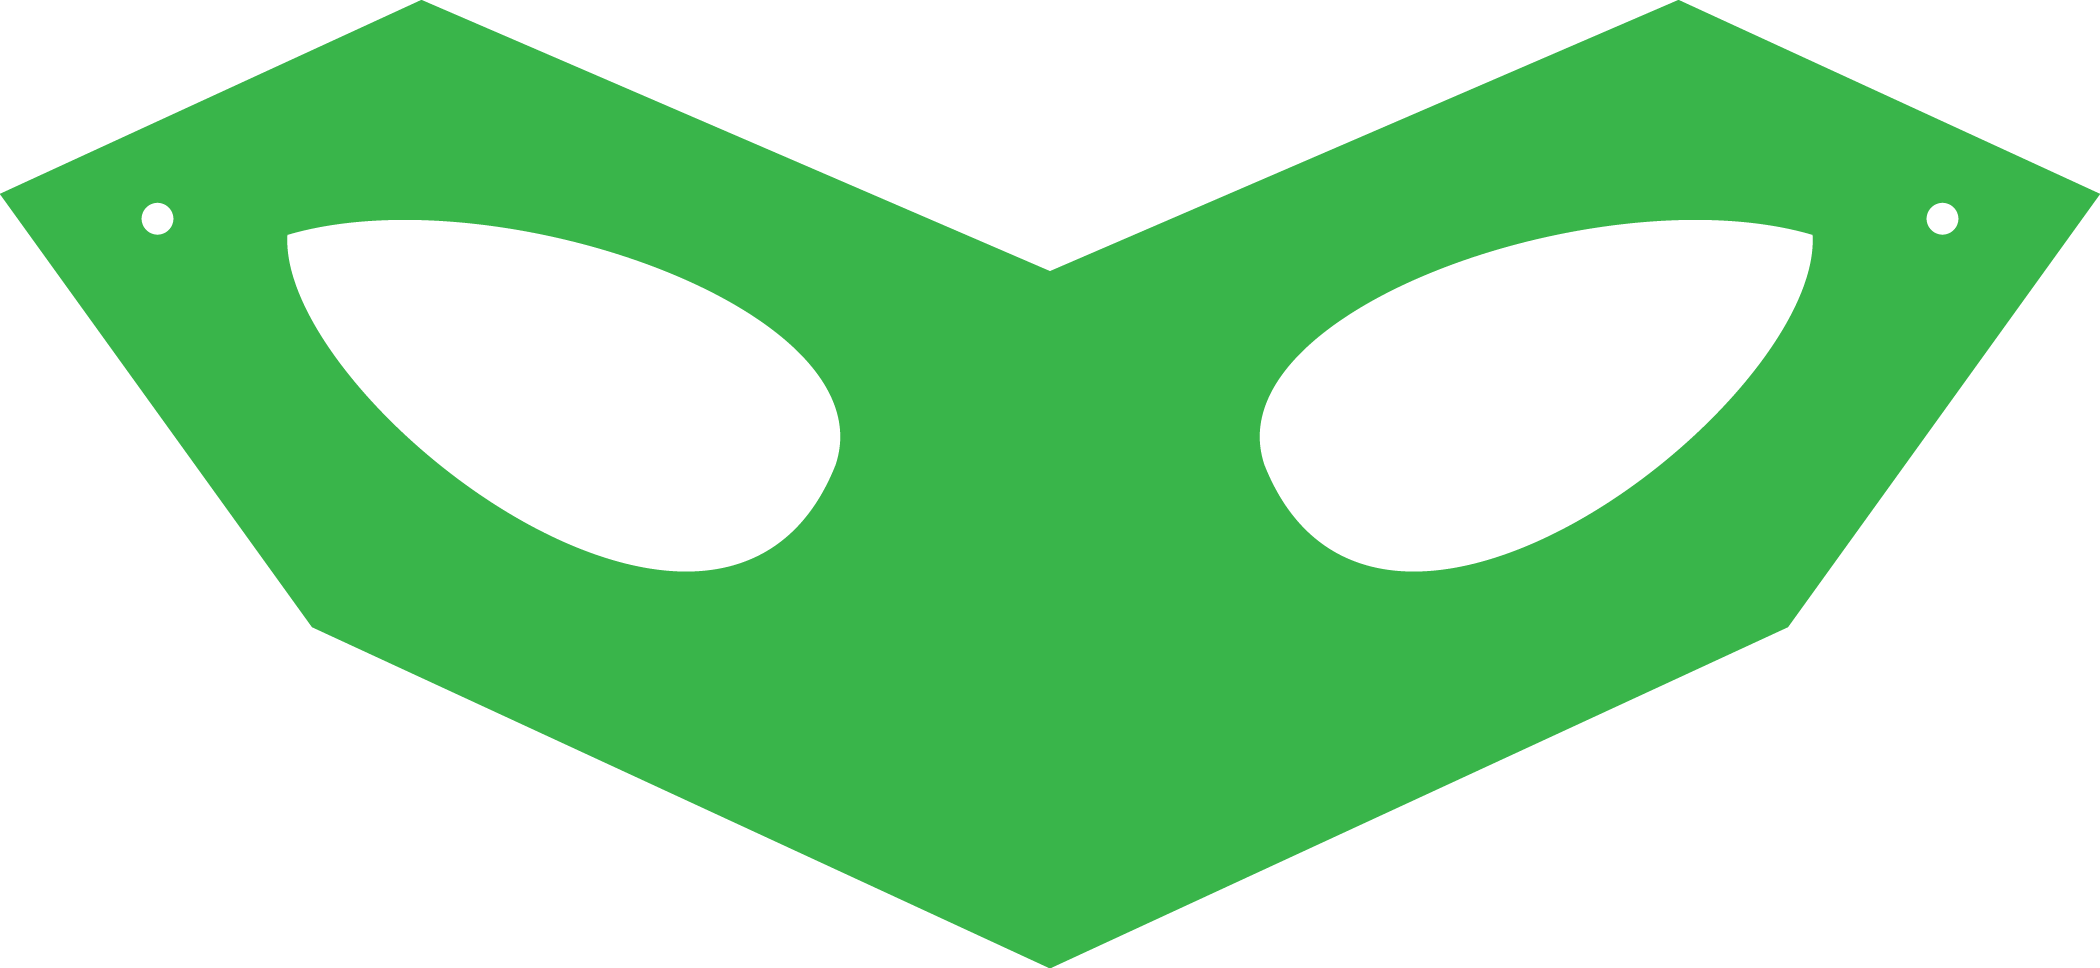 28 Images Of Green Lantern Mask Template Tonibest Com - Green Lantern Mask Cut Out (2100x968)